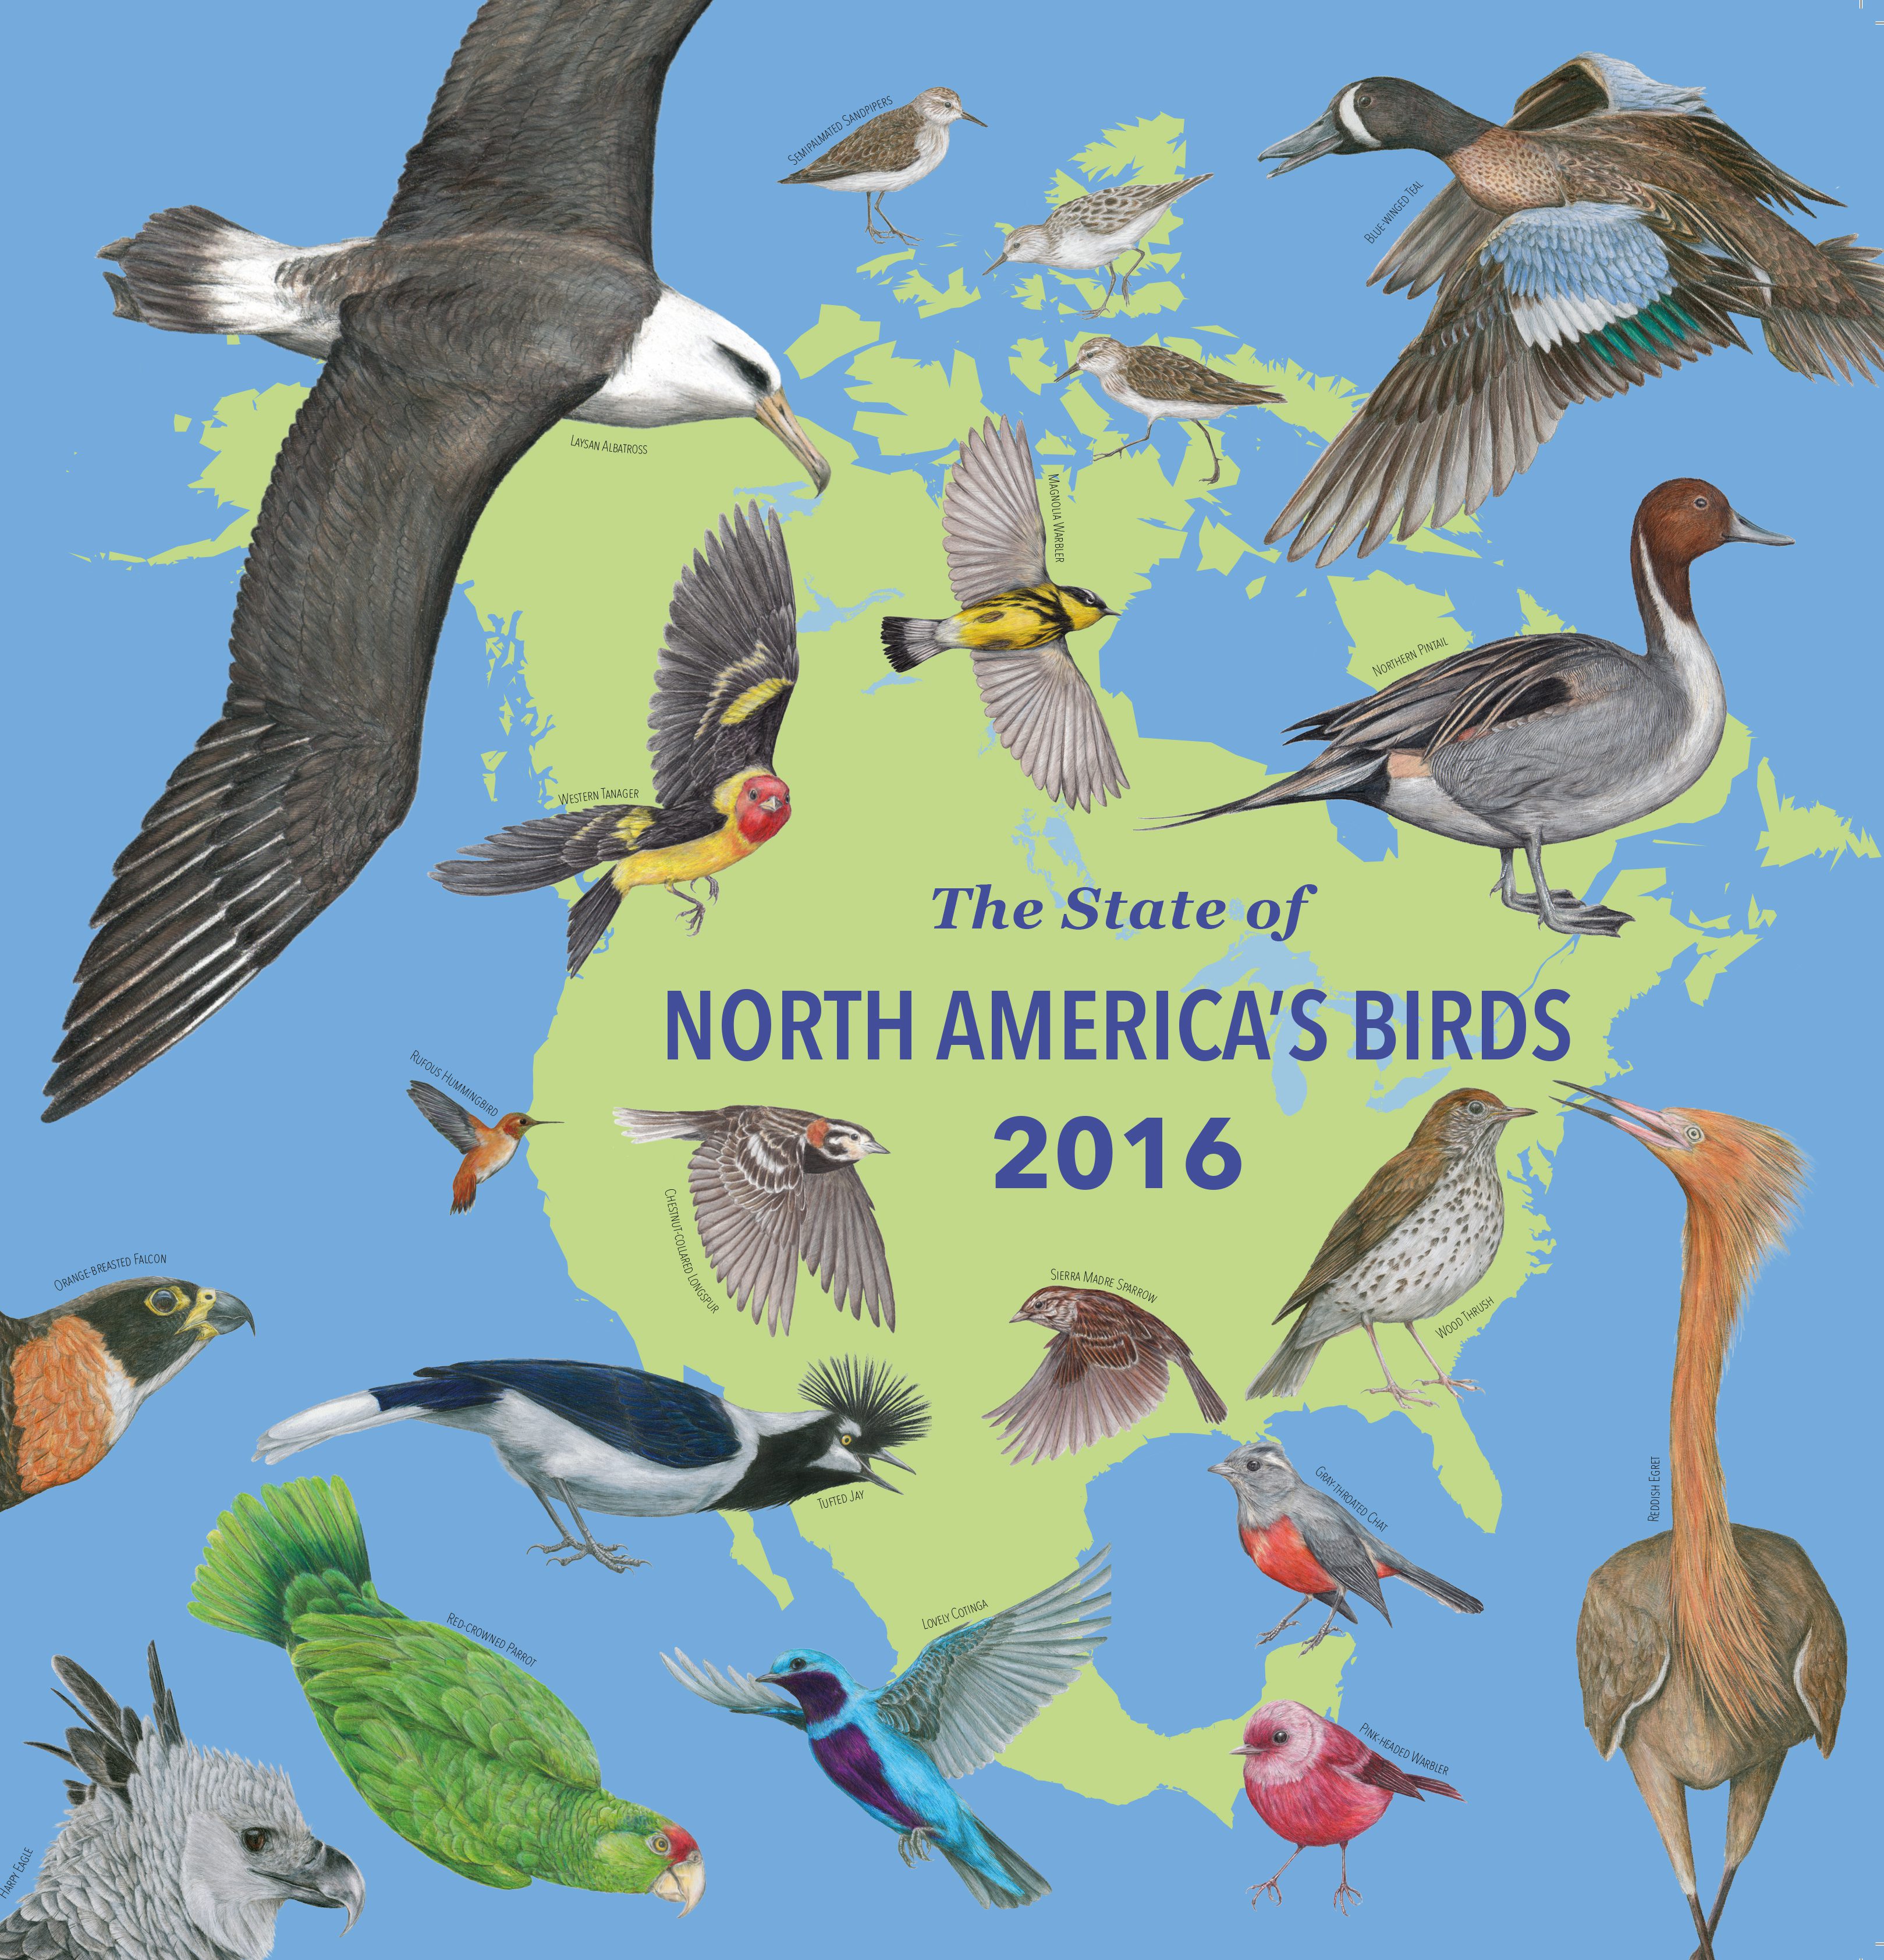 News Release – State of North America's Birds 2016